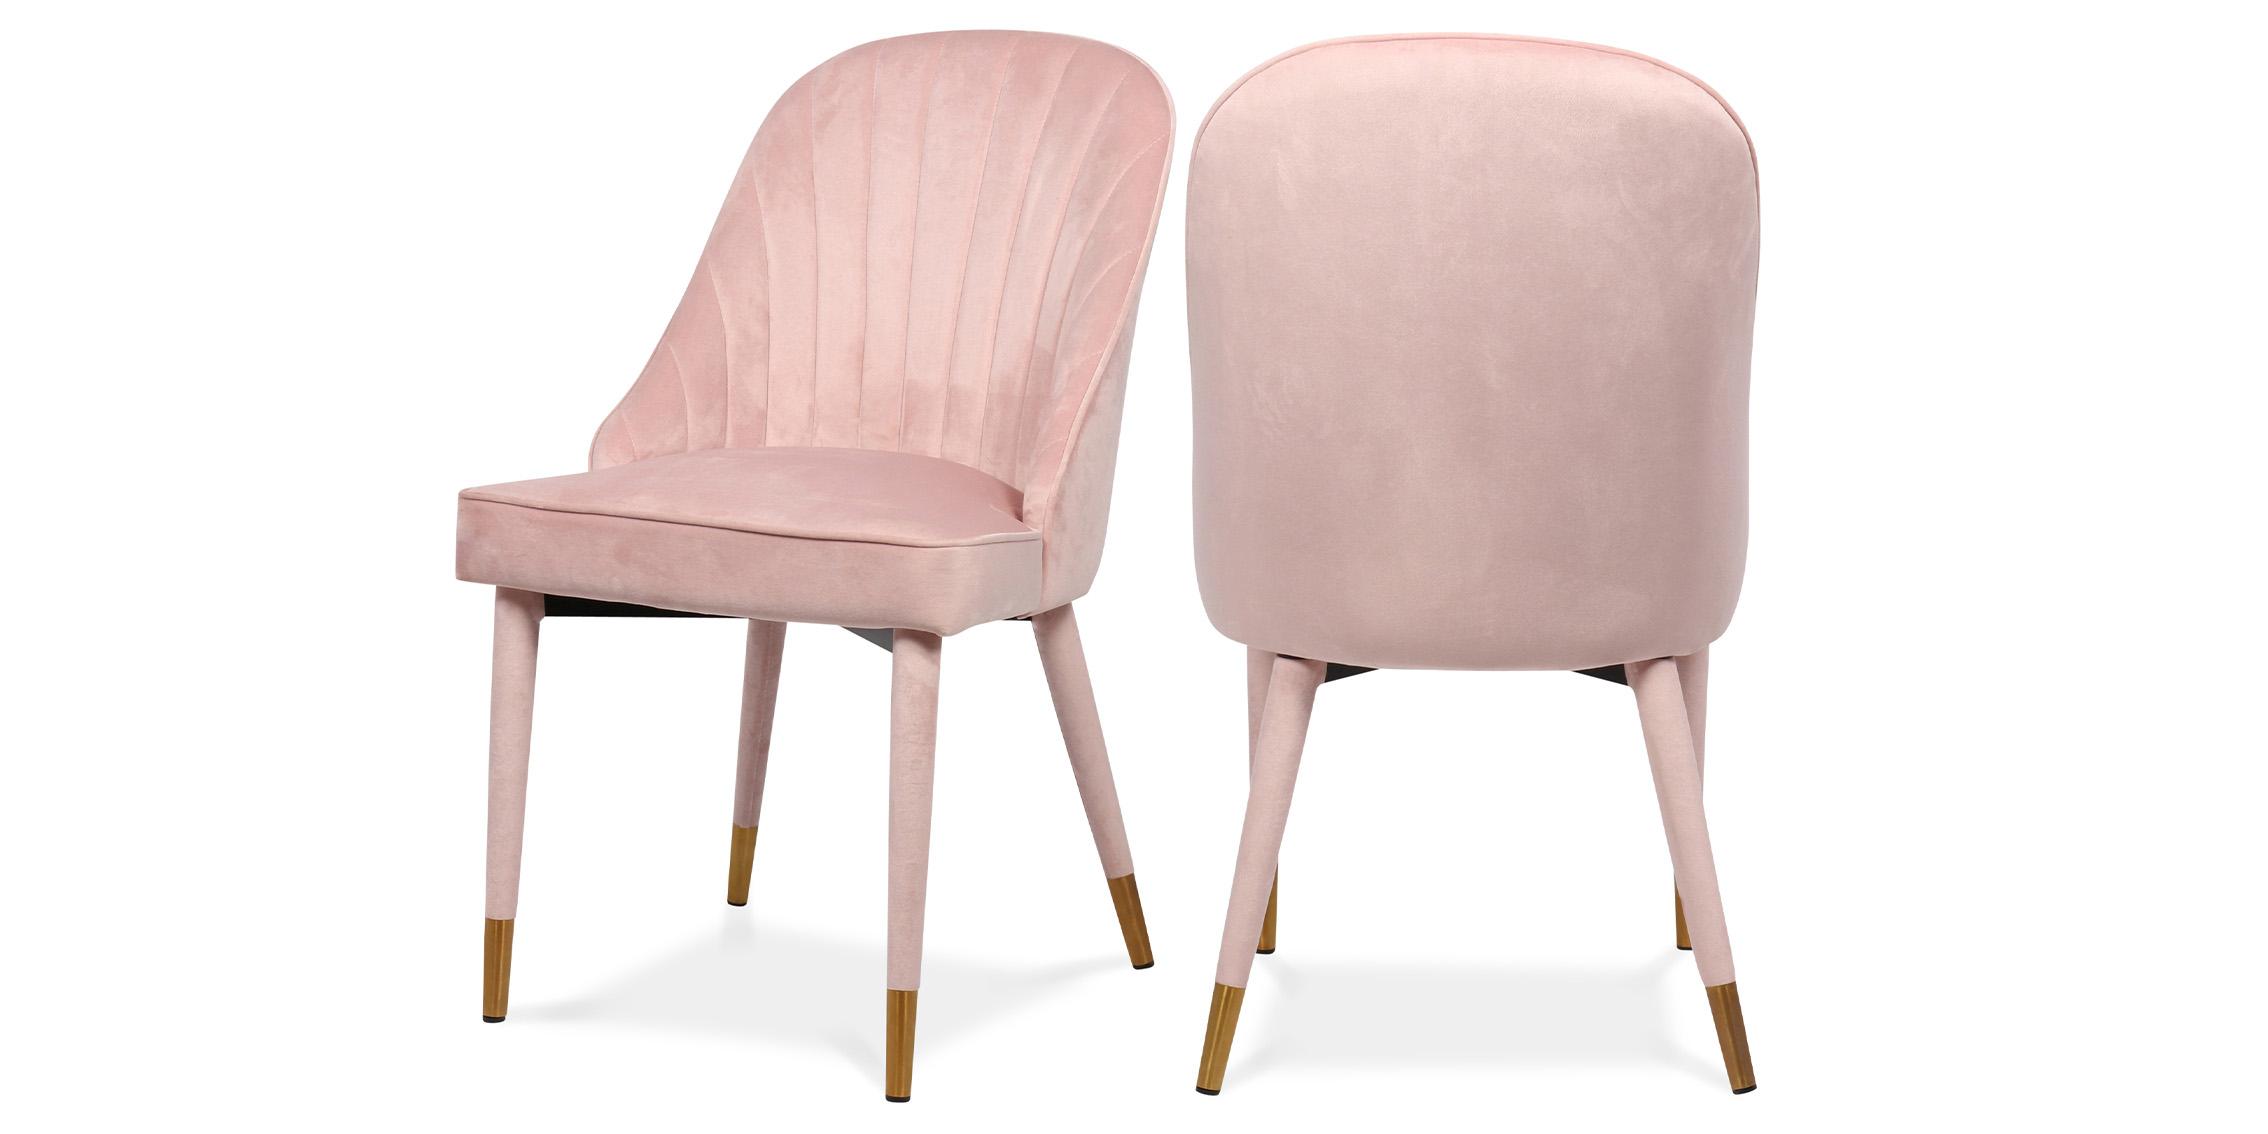 Contemporary, Modern Dining Chair Set BELLE 811Pink-C 811Pink-C in Pink Velvet